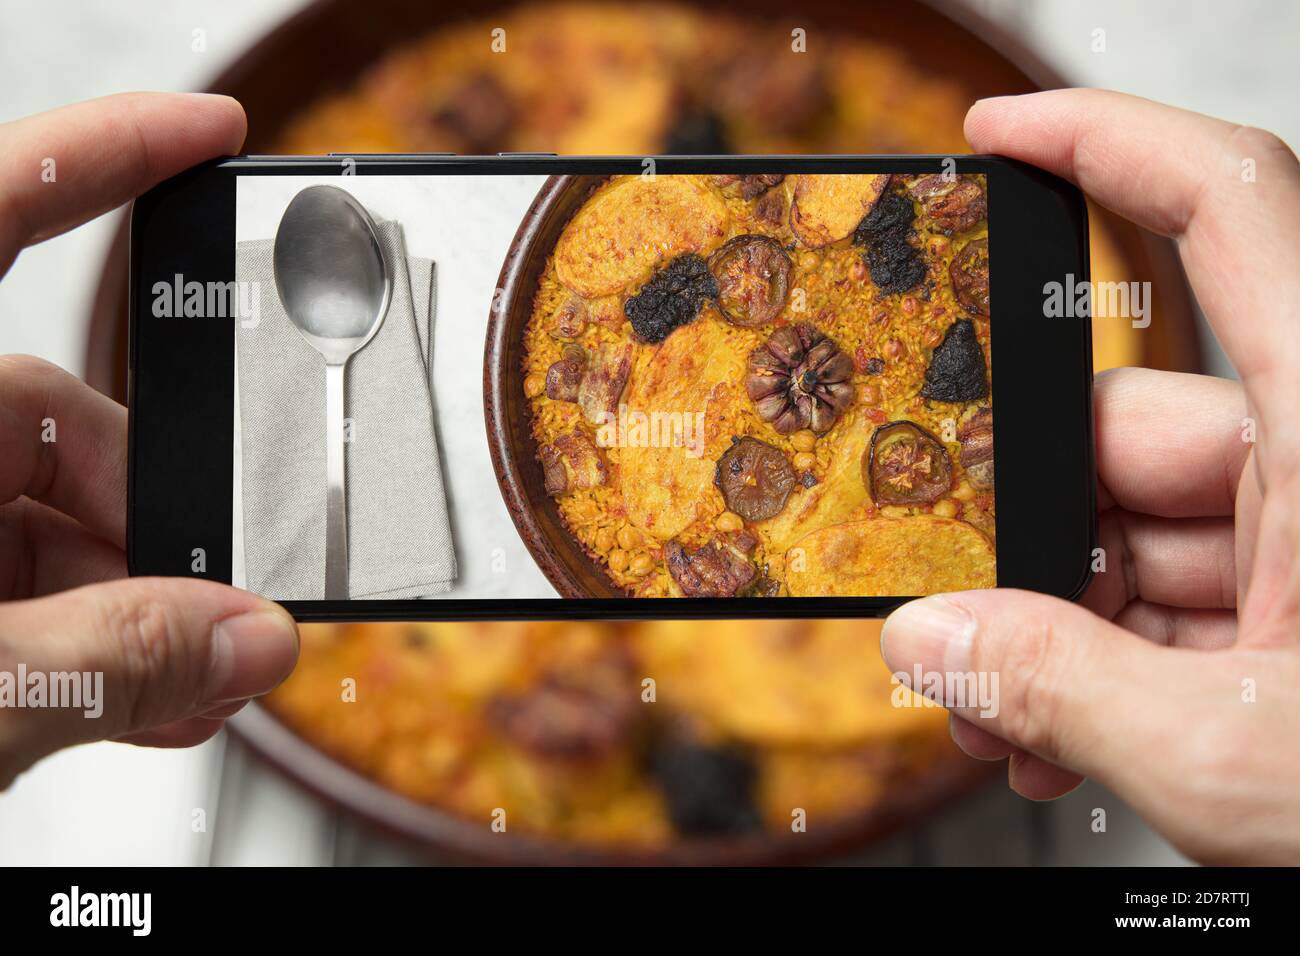 Man's hands taking a picture of a baked rice casserole. Valencia, Spain Stock Photo